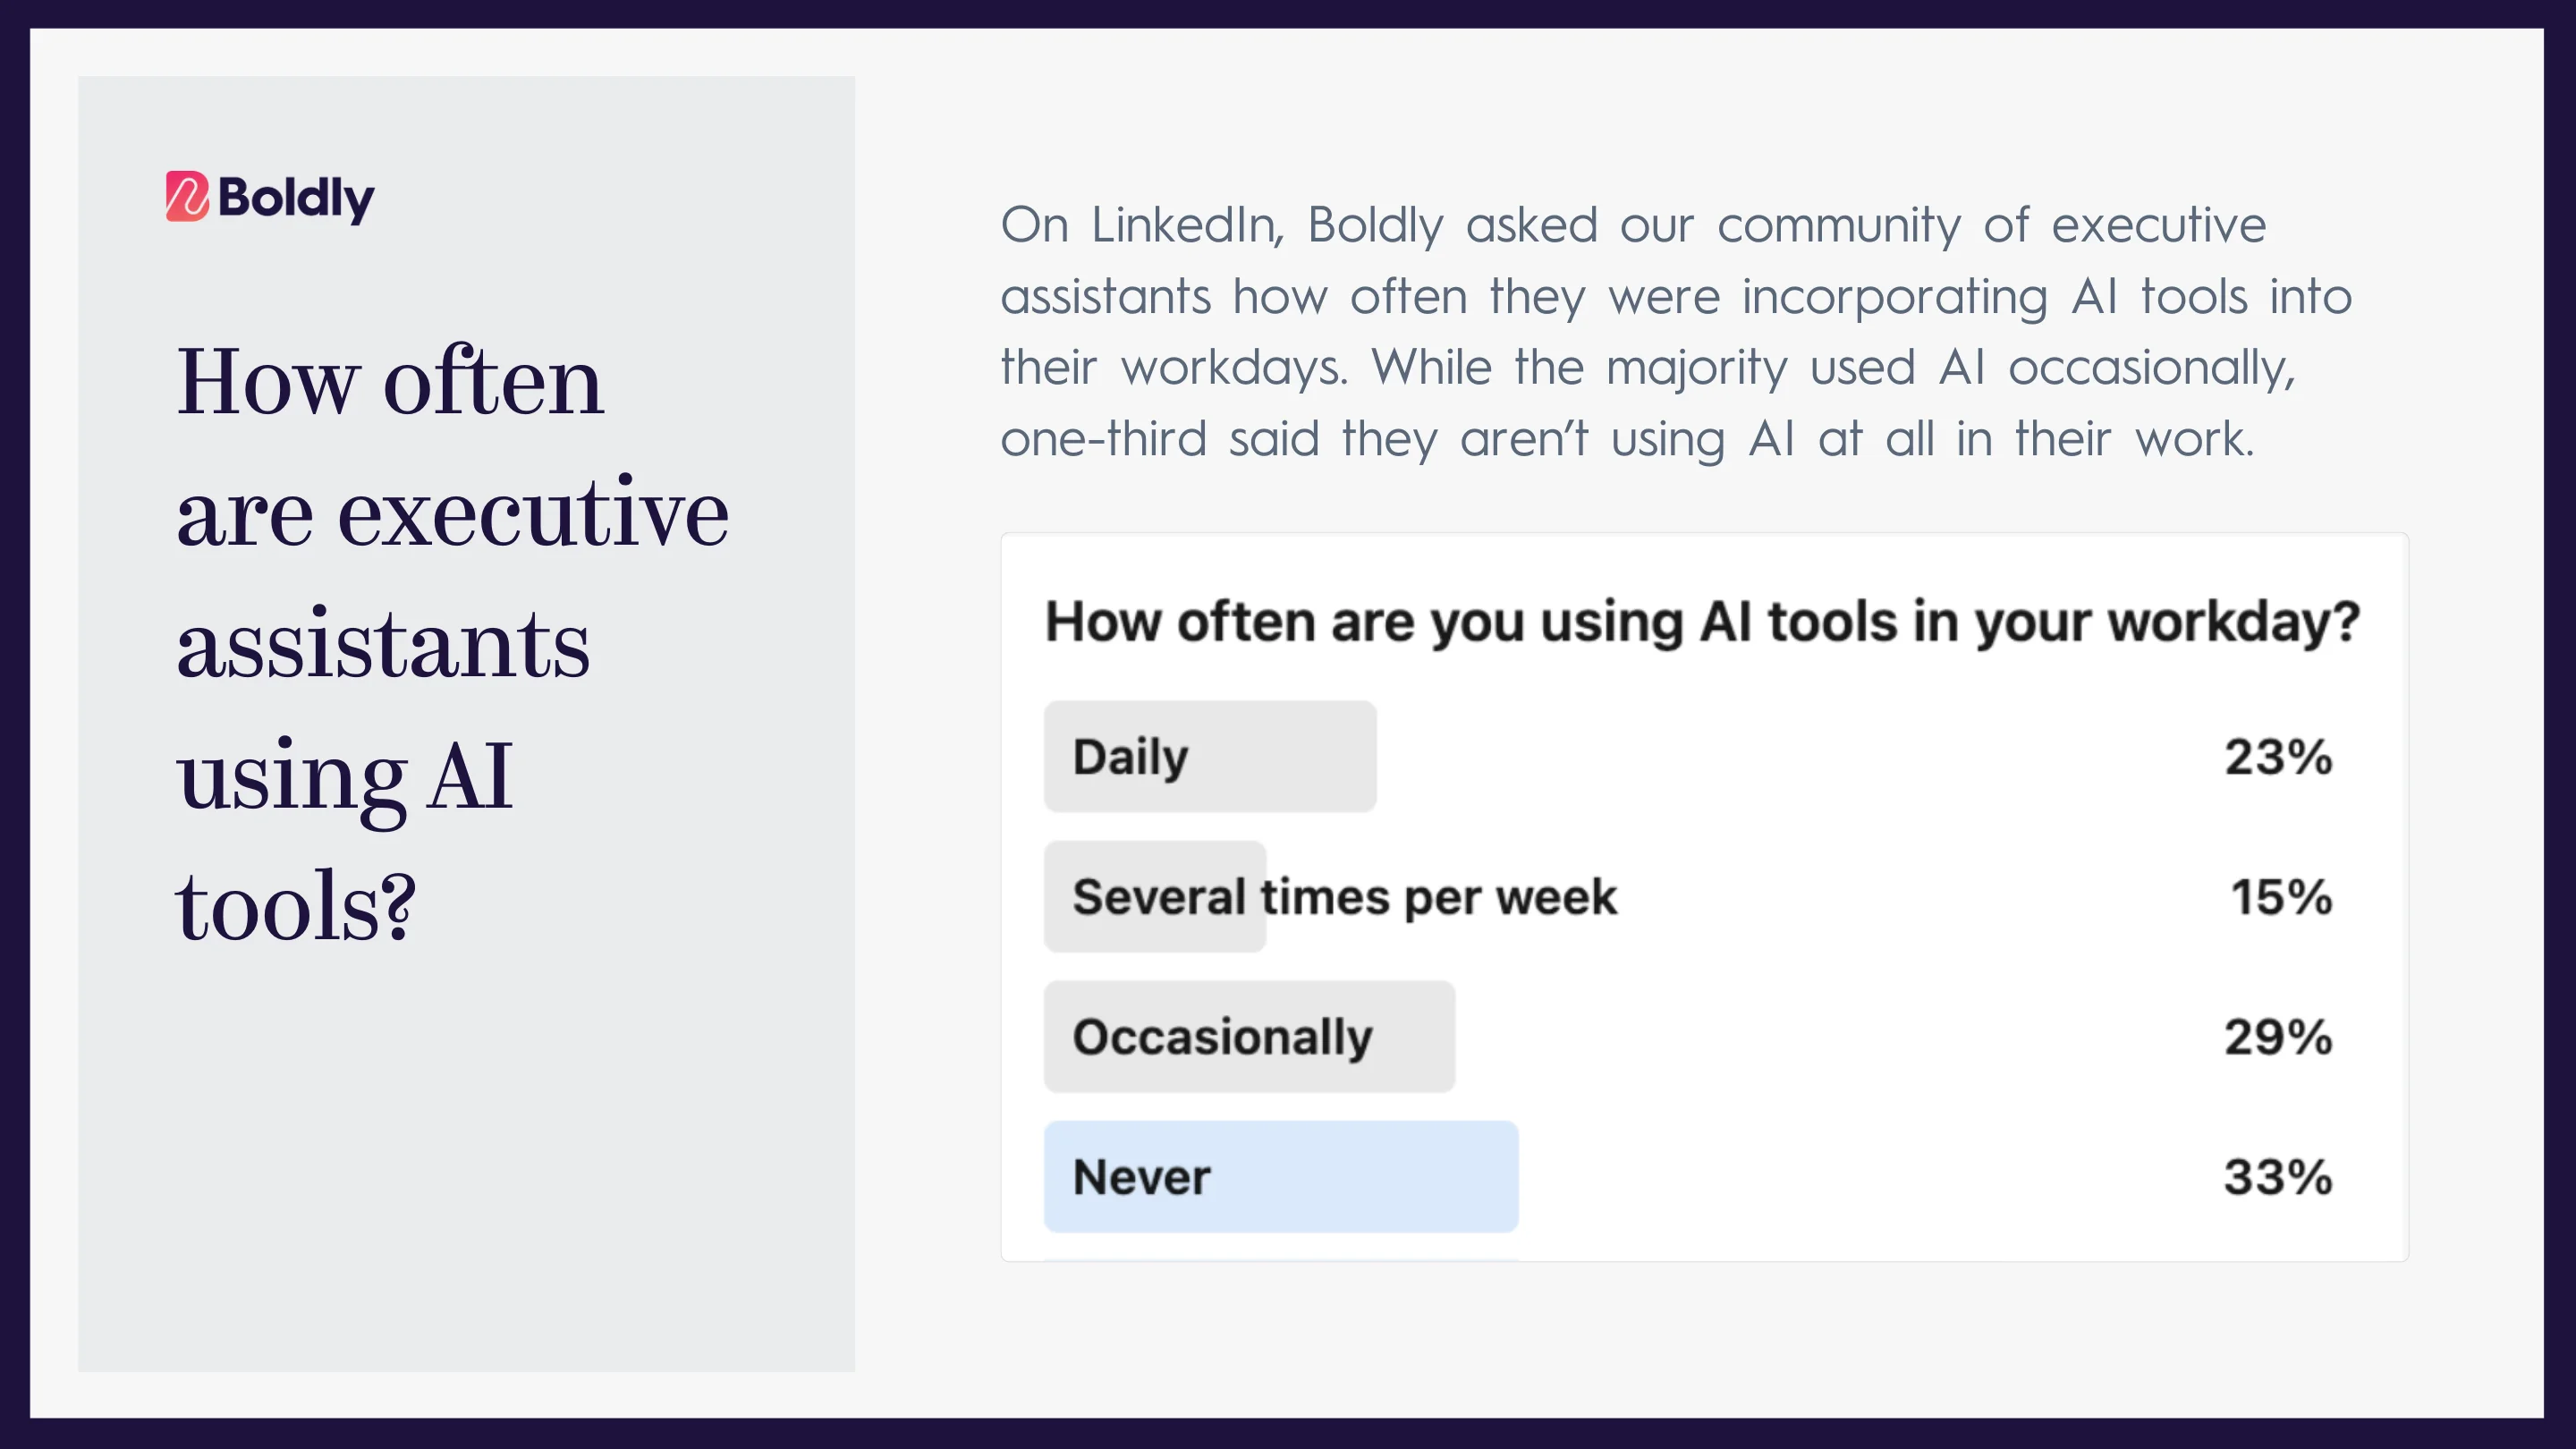 Chart showing the results of a survey that asked executive assistants how often they use AI tools. 